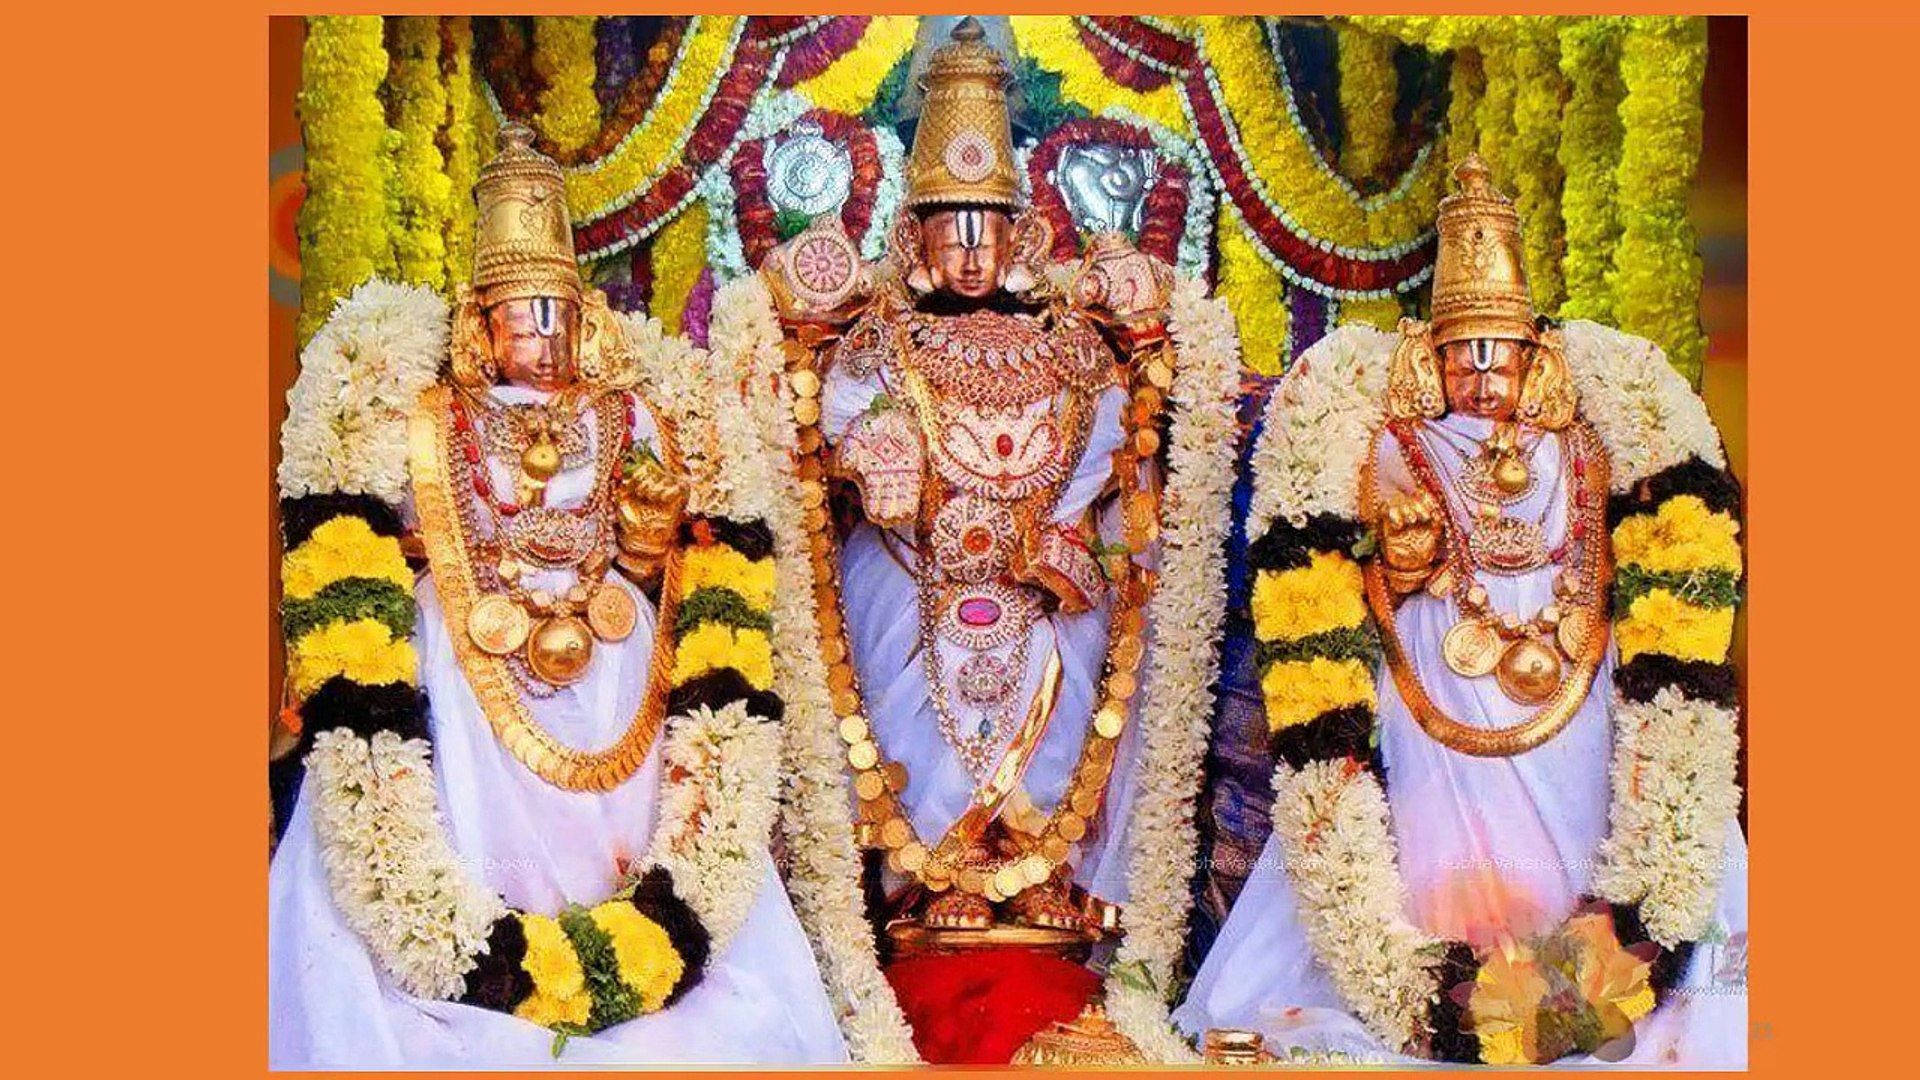 Three Lord Venkateswara Statues With Garlands Background